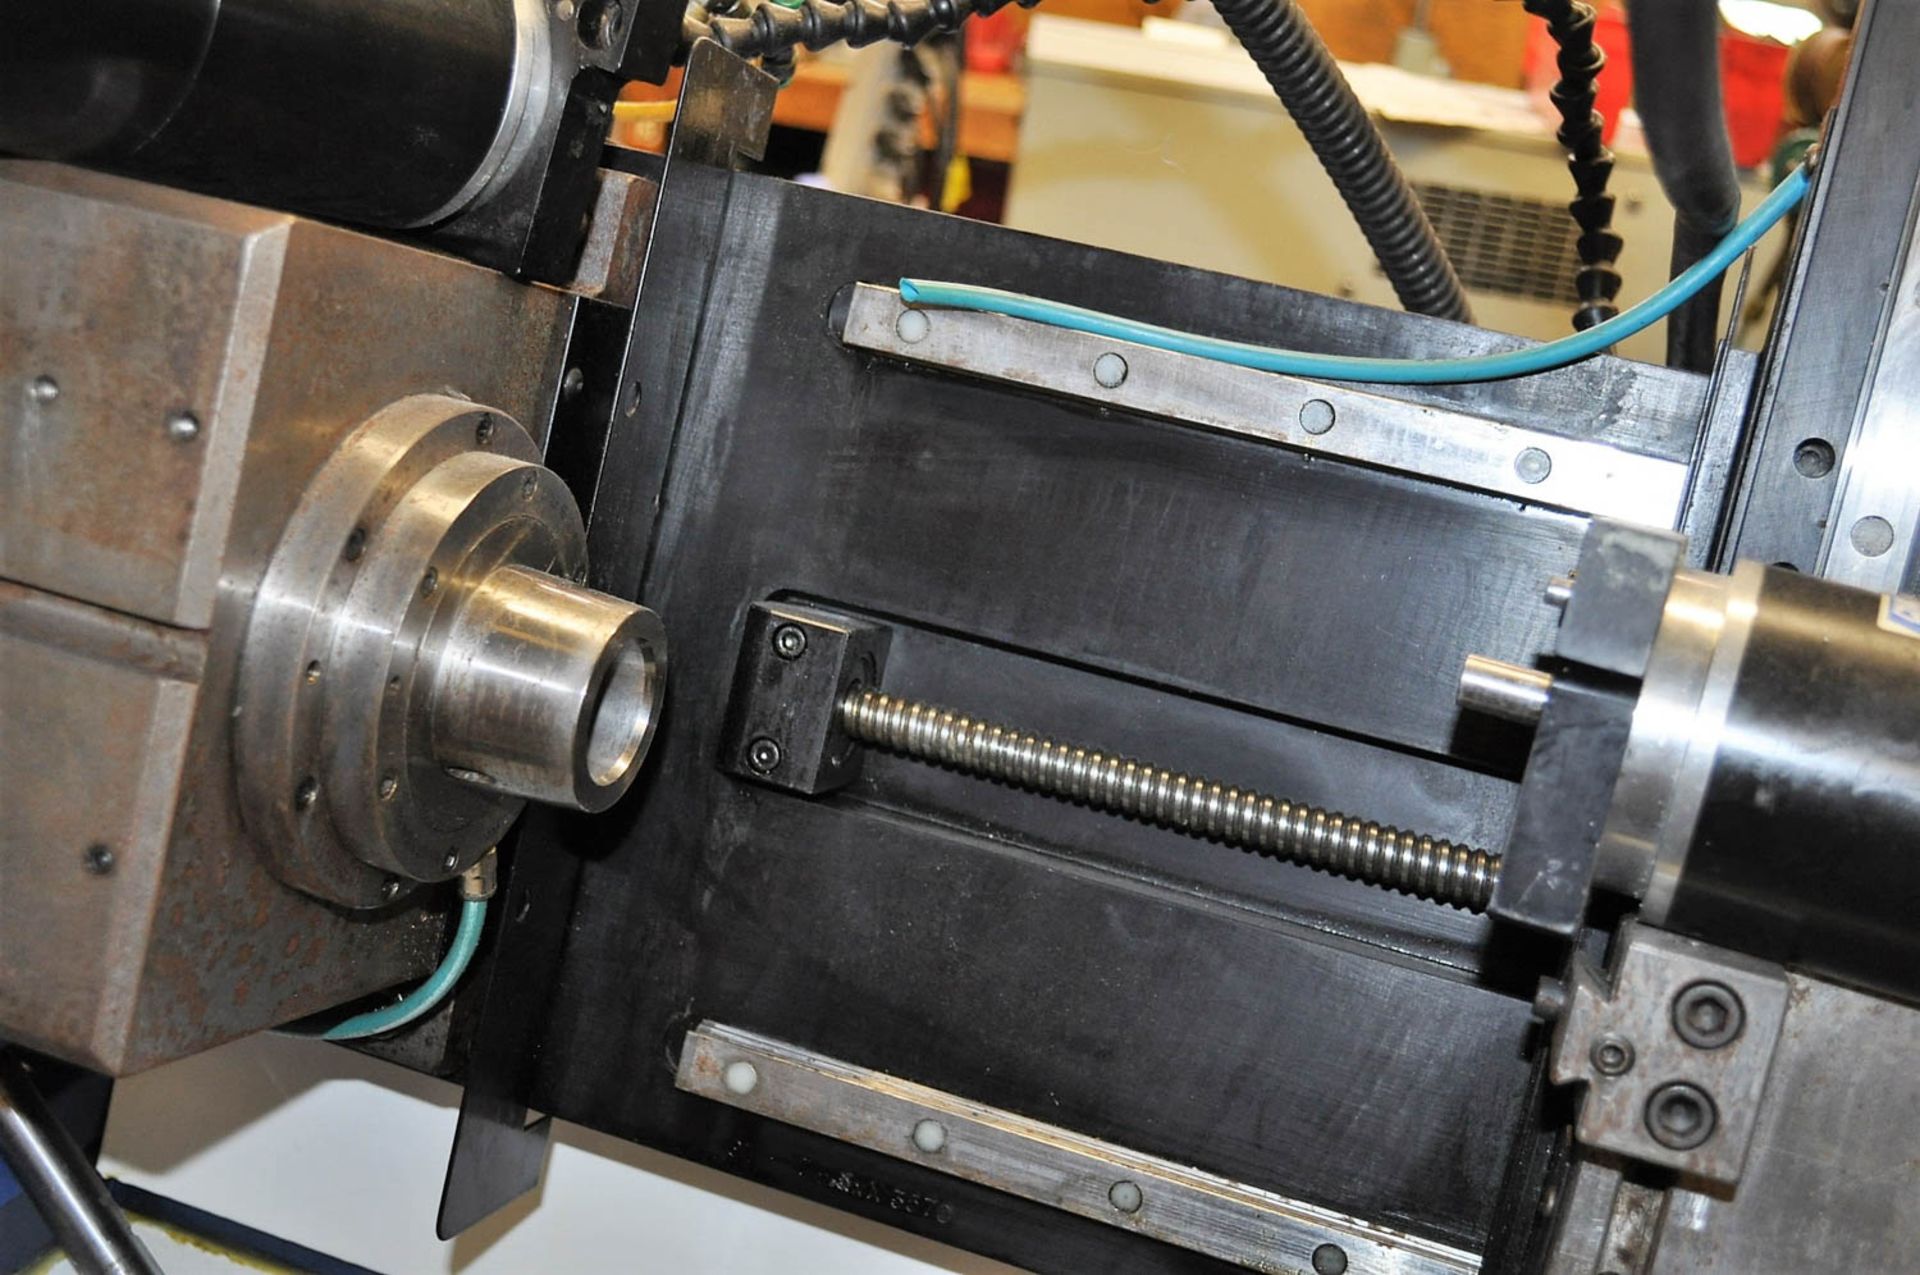 OMNITURN MDL. GT-JR 2-AXIS CNC TURNING CENTER, WITH OMNITURN CNC CONTROL, 5-C COLLET CHUCK, CONTROL, - Image 2 of 4